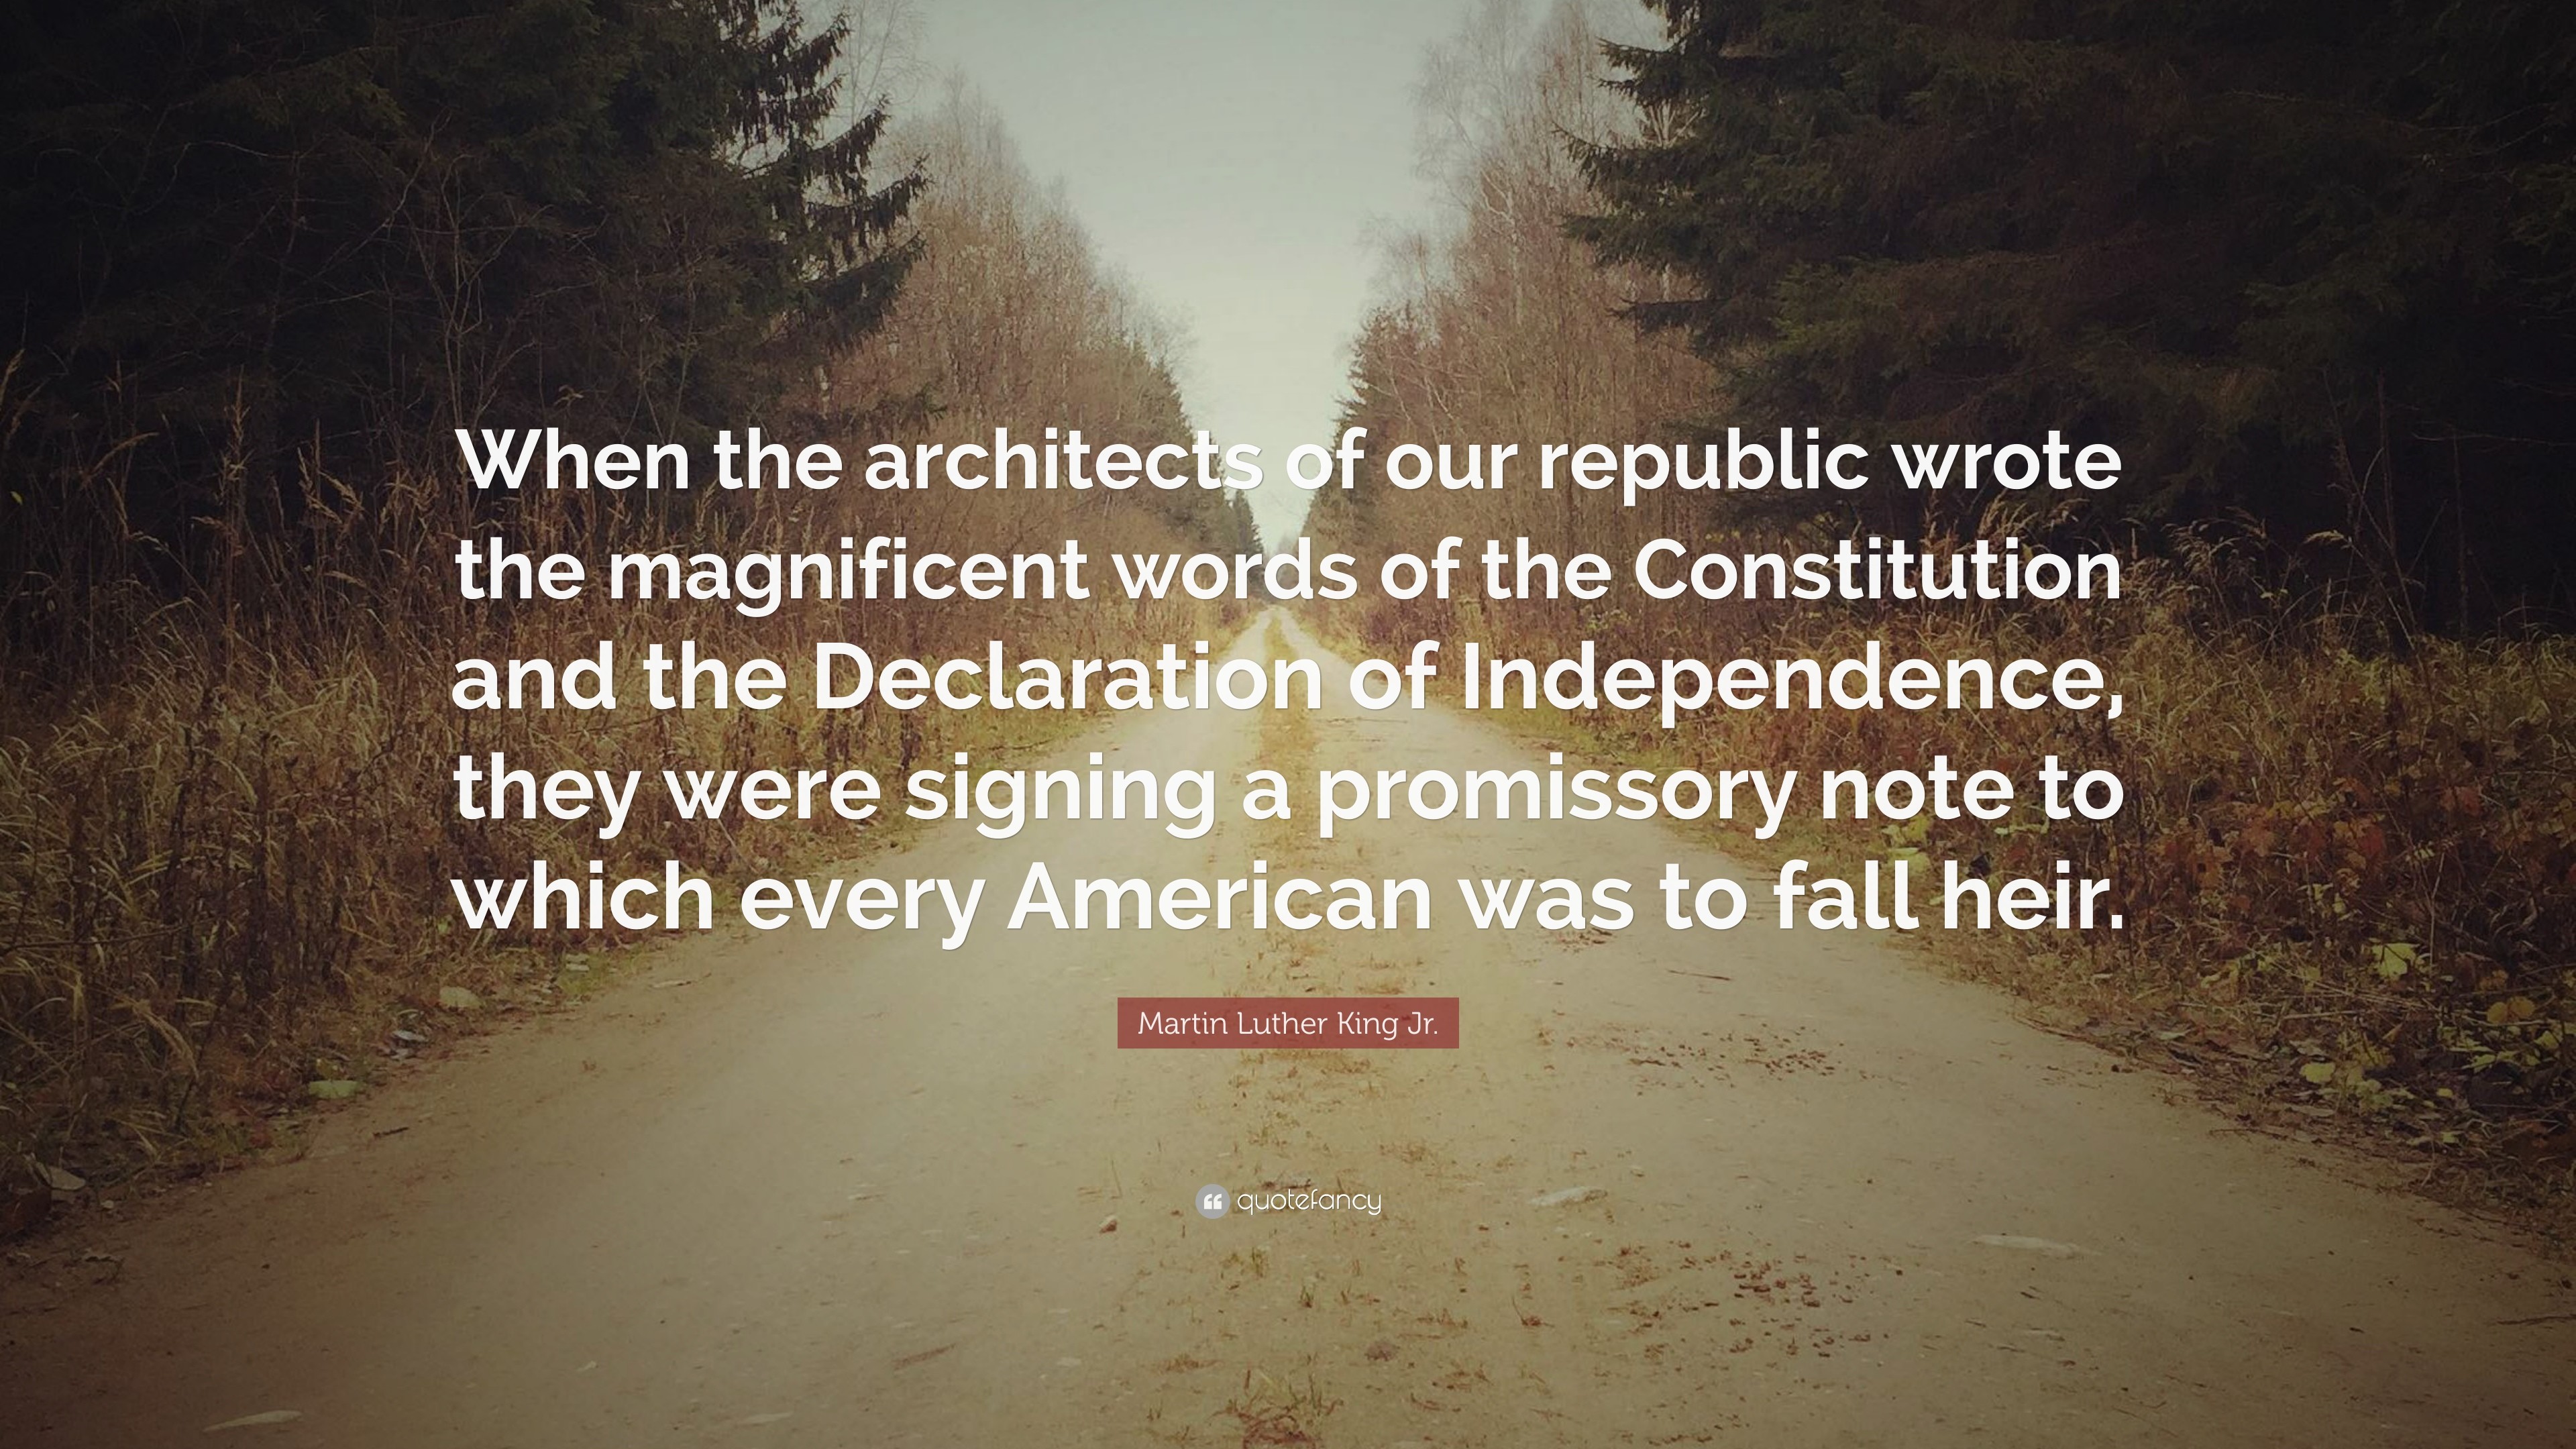 3840x2160 Martin Luther King Jr. Quote: “When the architects of our republic wrote the